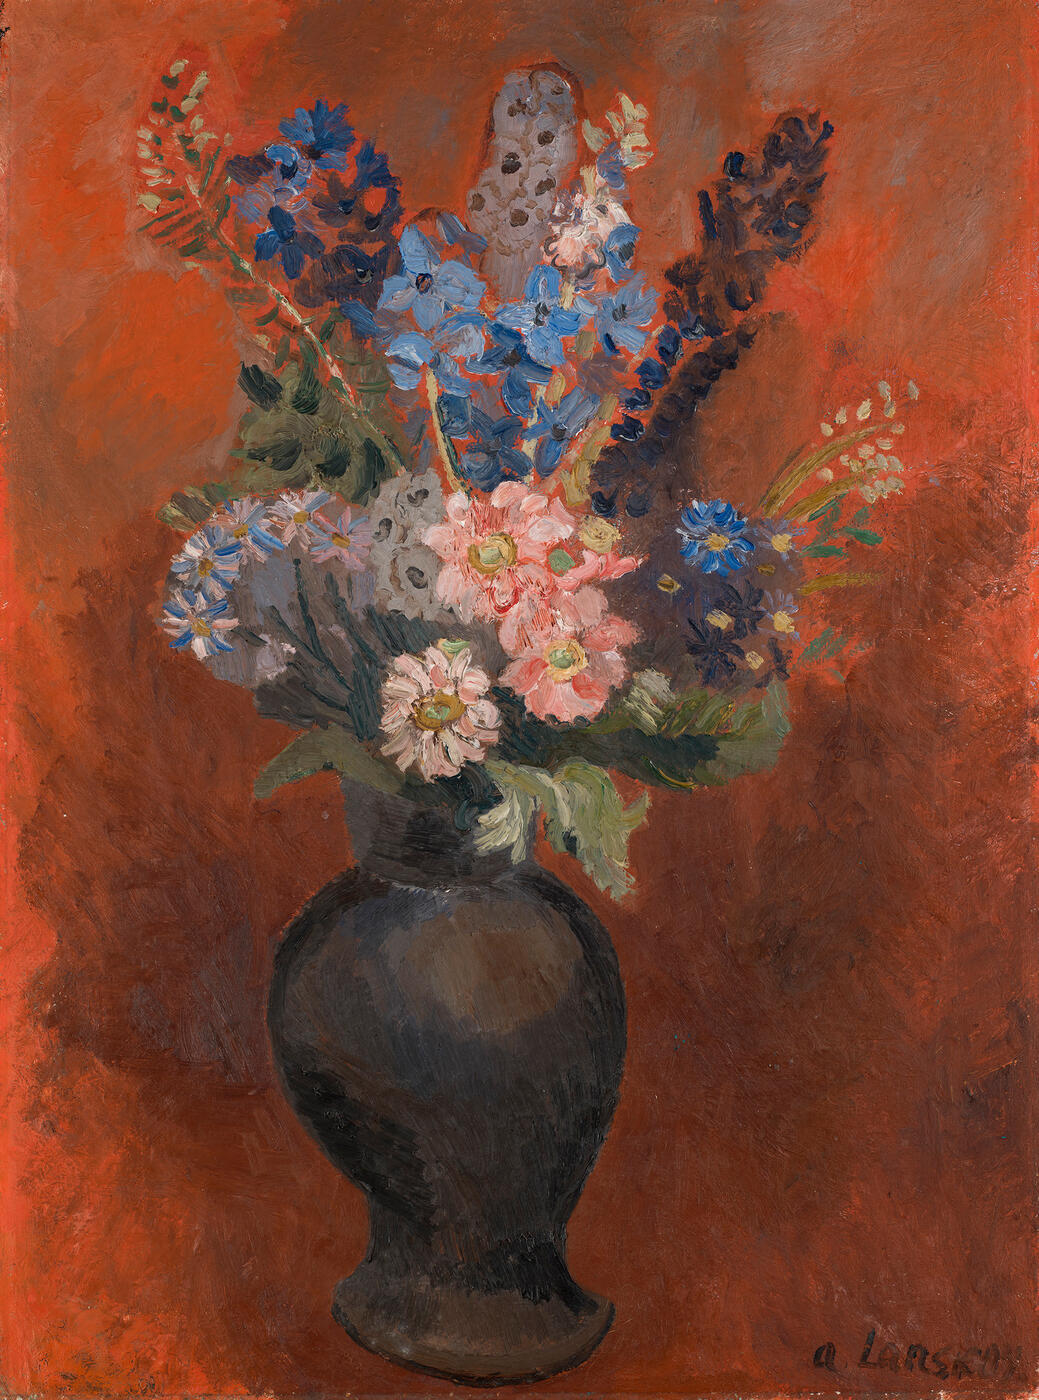 Bouquet of Flowers on a Red Background